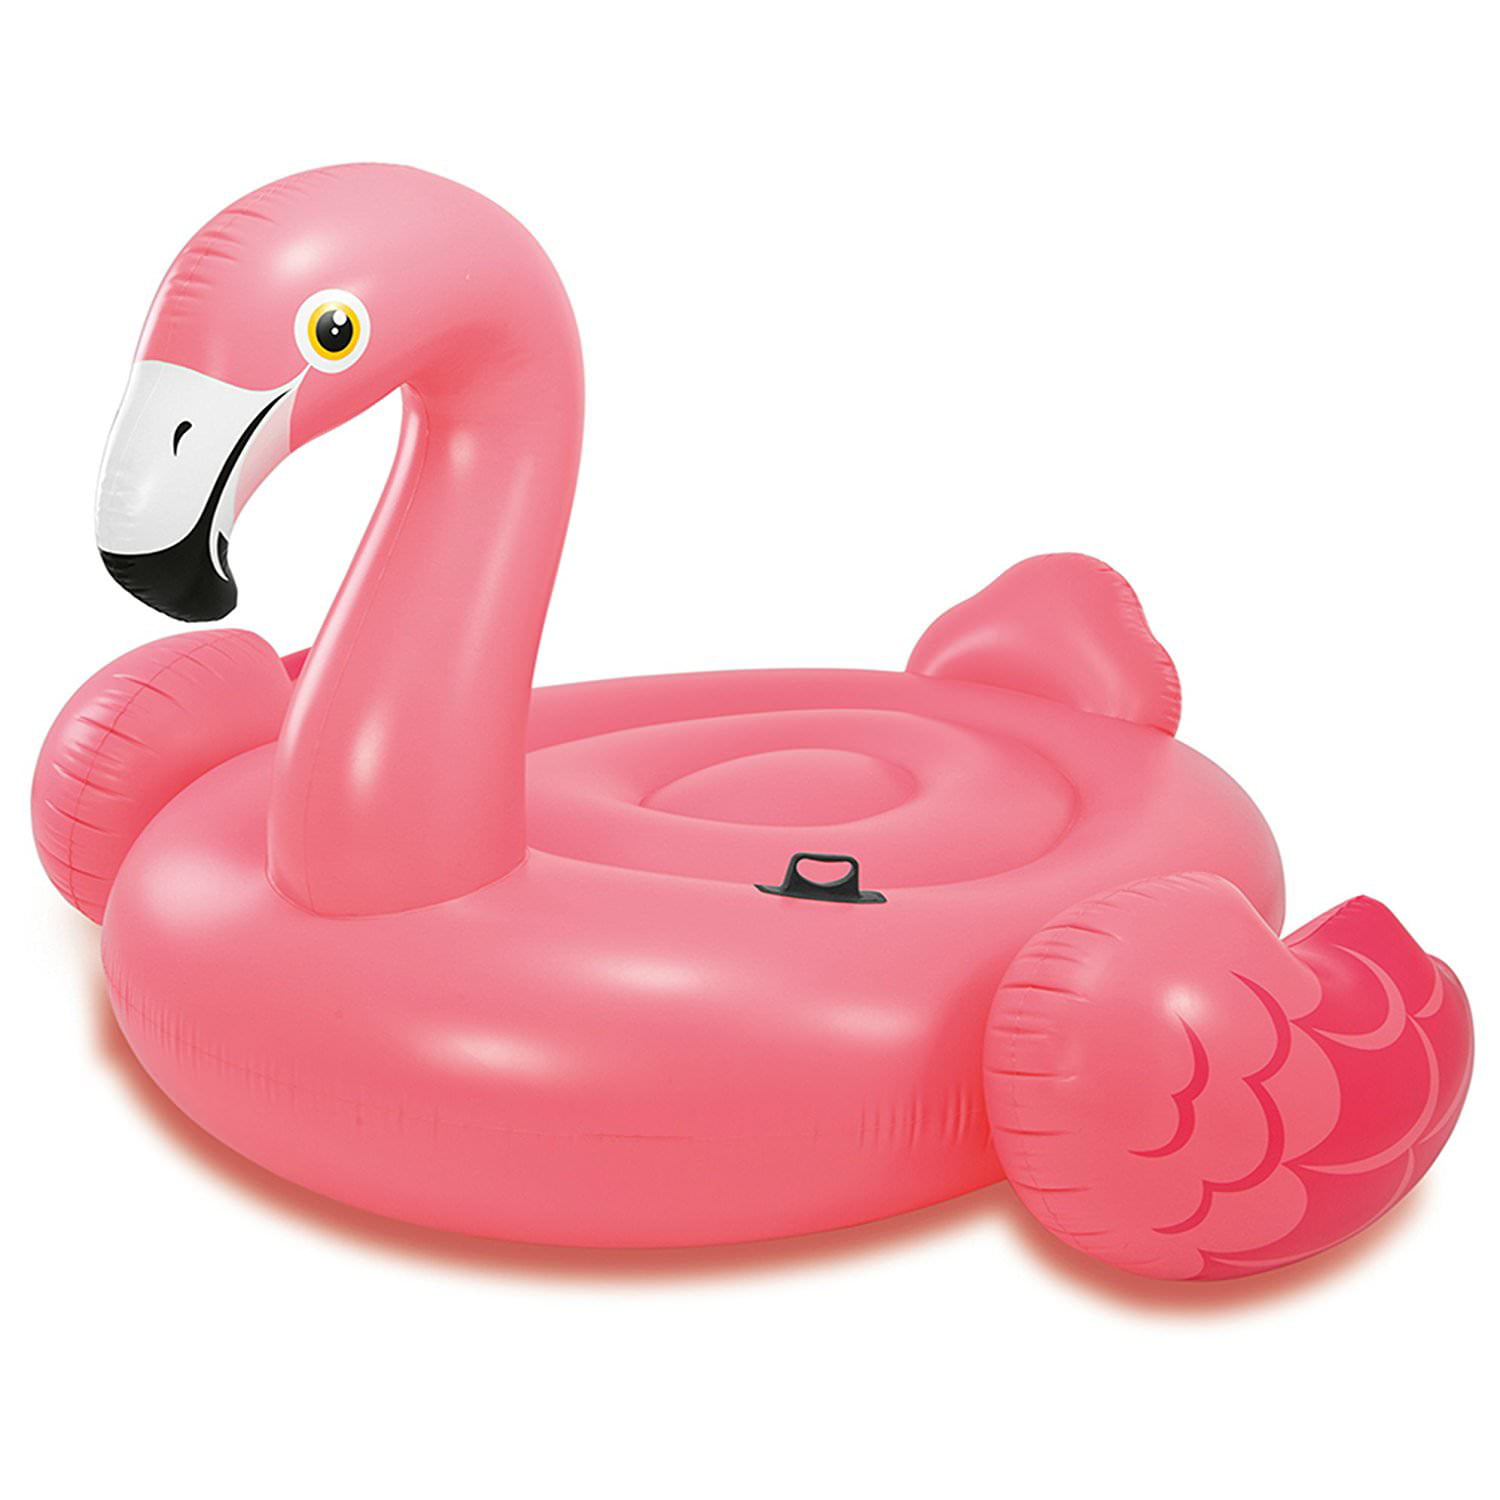 Intex Giant Inflatable Mega Dragon 6ft Island Ride-on Swimming Pool Float Raft for sale online 